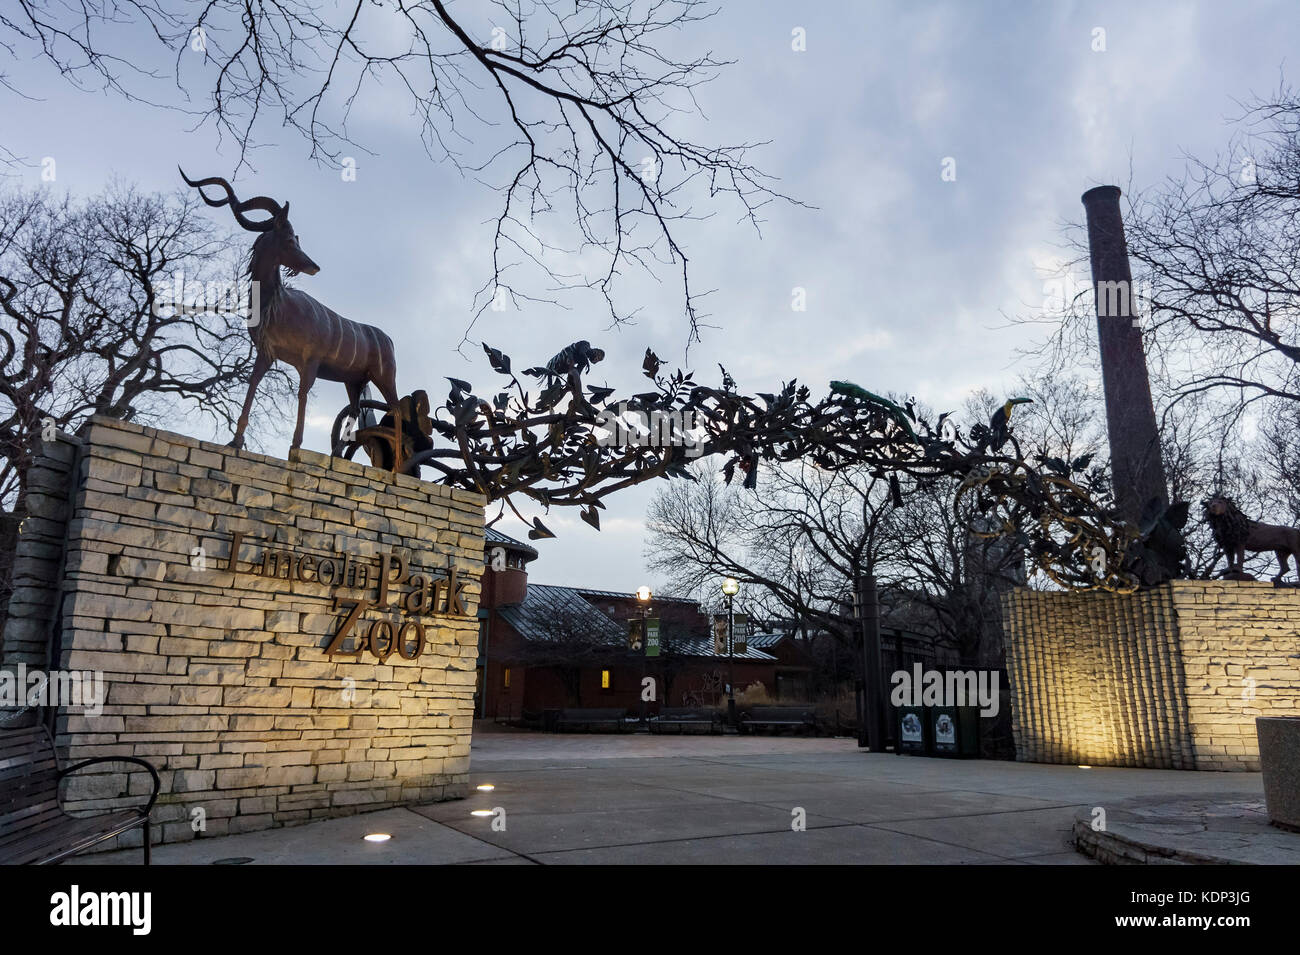 Chicago, FEB 1: Night view of the entrance of Lincoln Park Zoo on FEB 1, 2012 at Millennium Park, Chicago, Illinois, United States Stock Photo